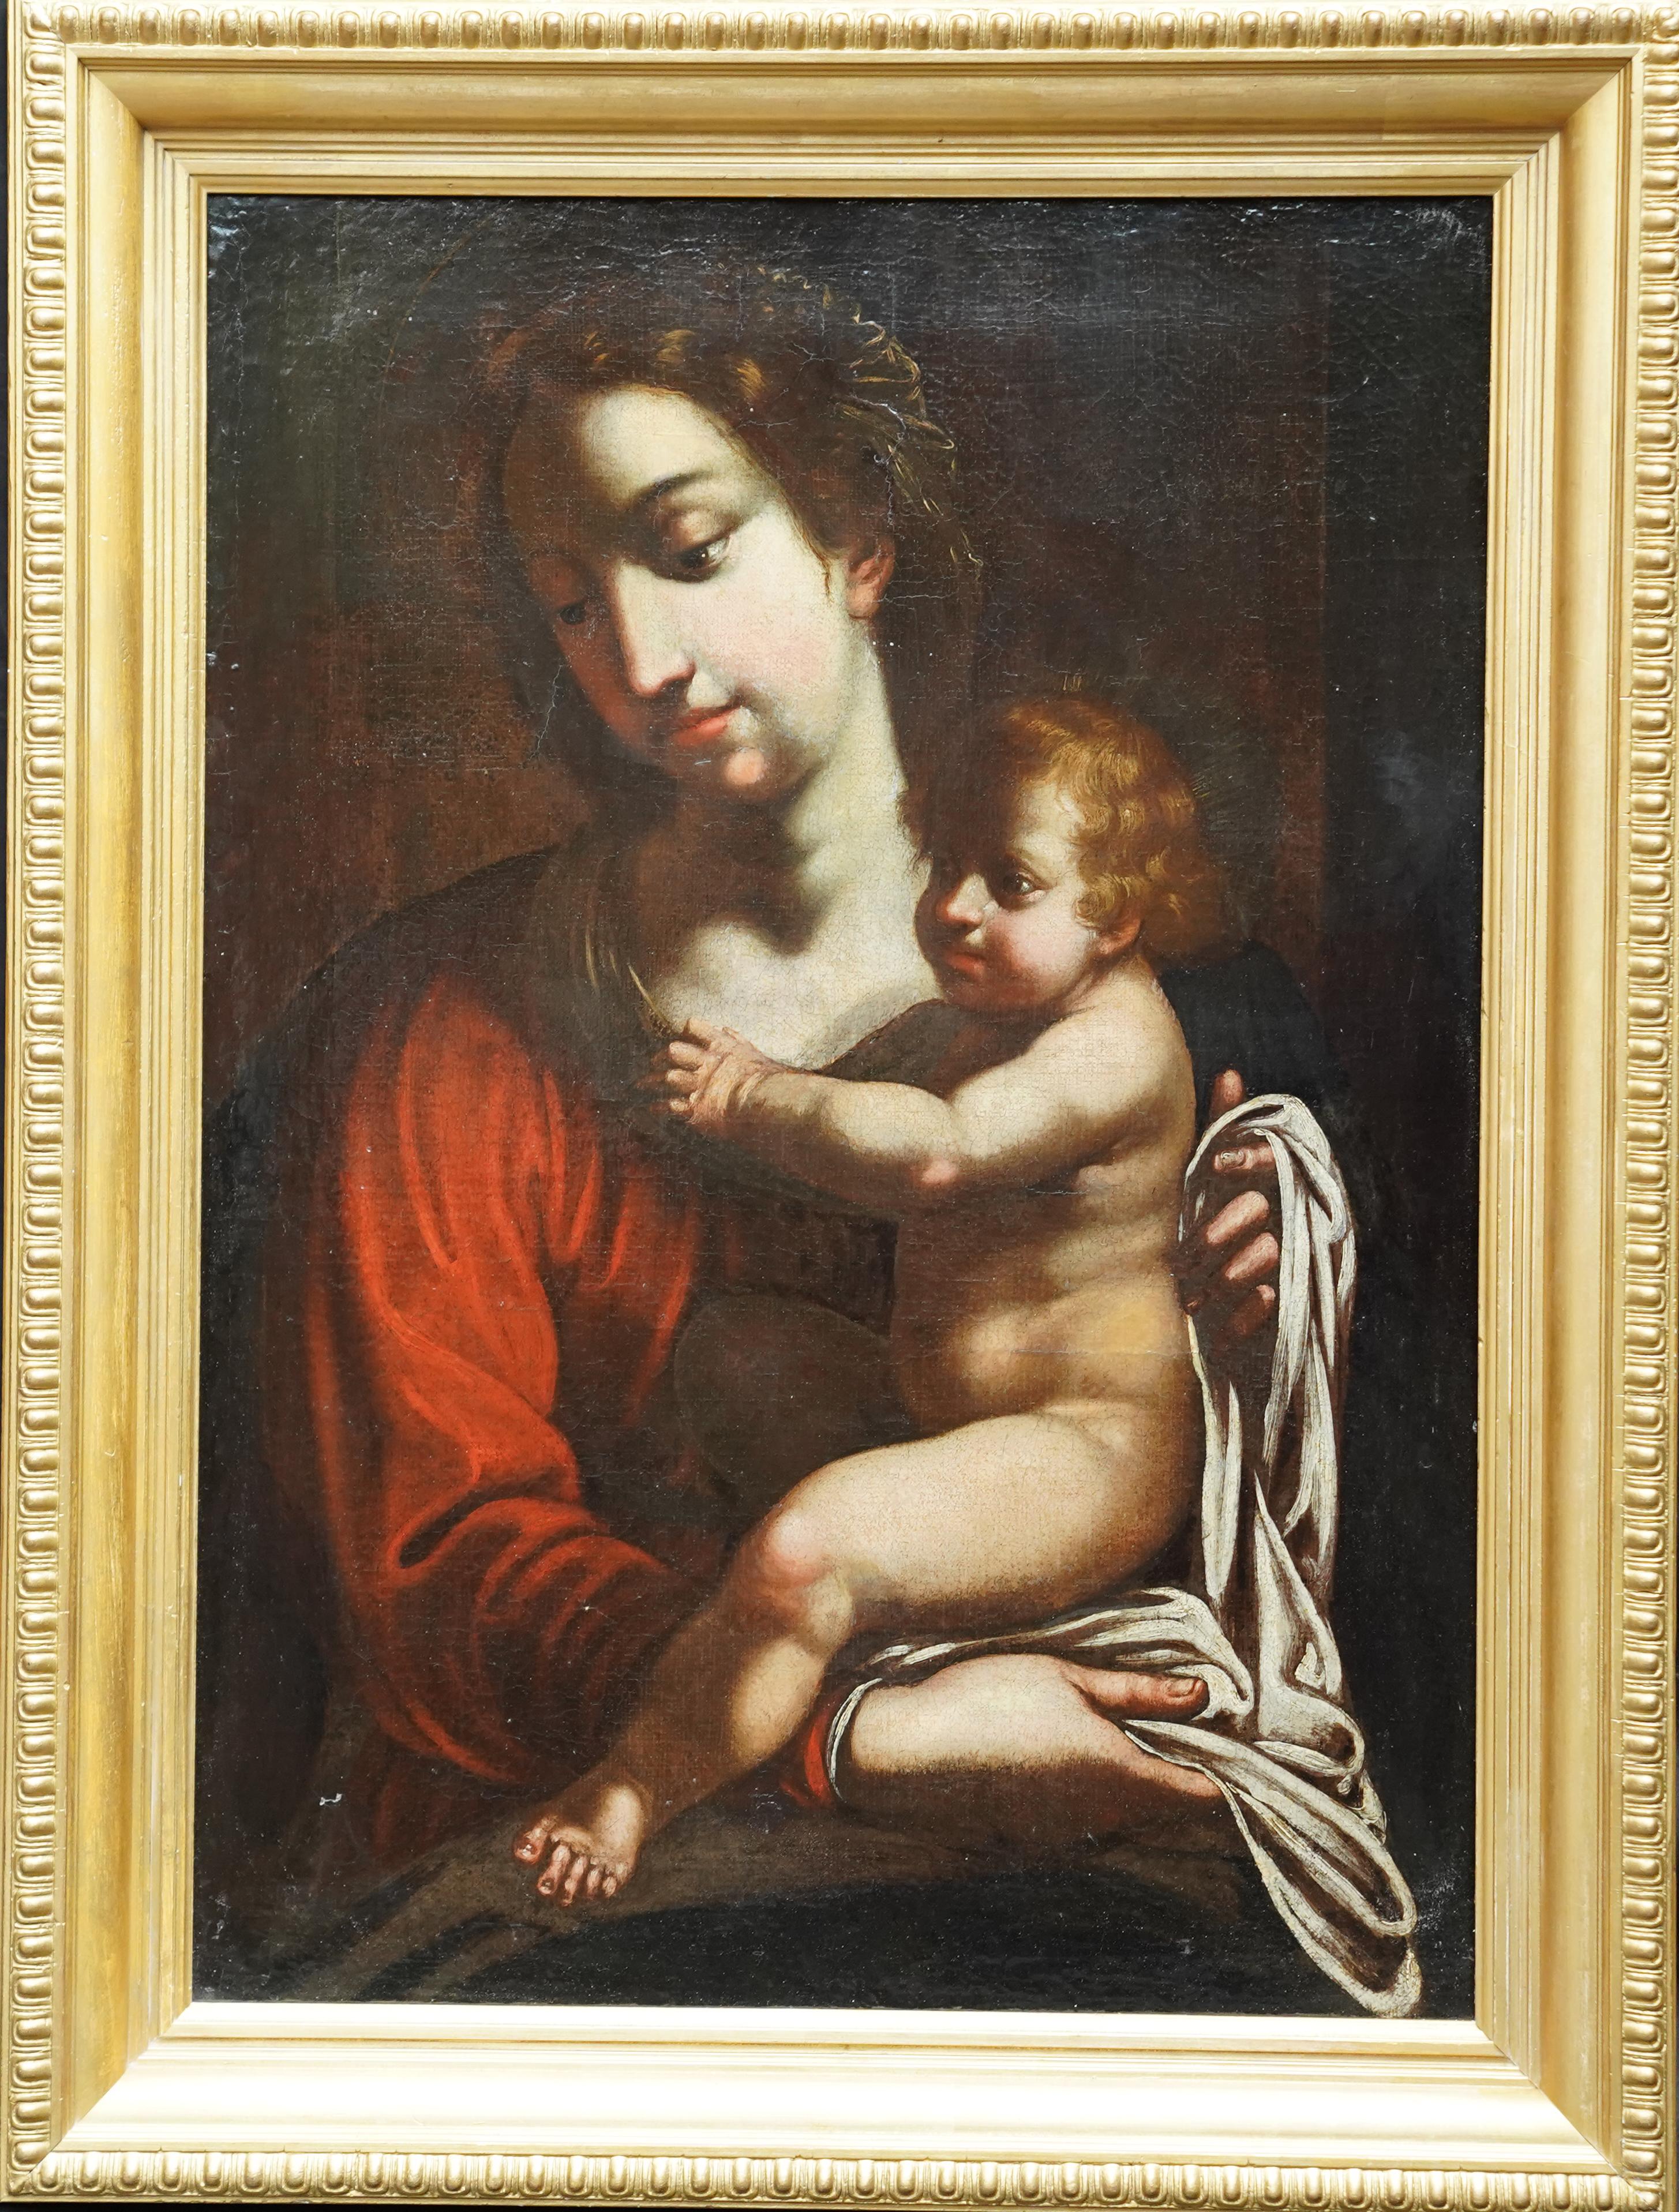 Bartolomeo Schedoni Portrait Painting - Madonna and Child- Italian Old Master religious art portrait oil painting